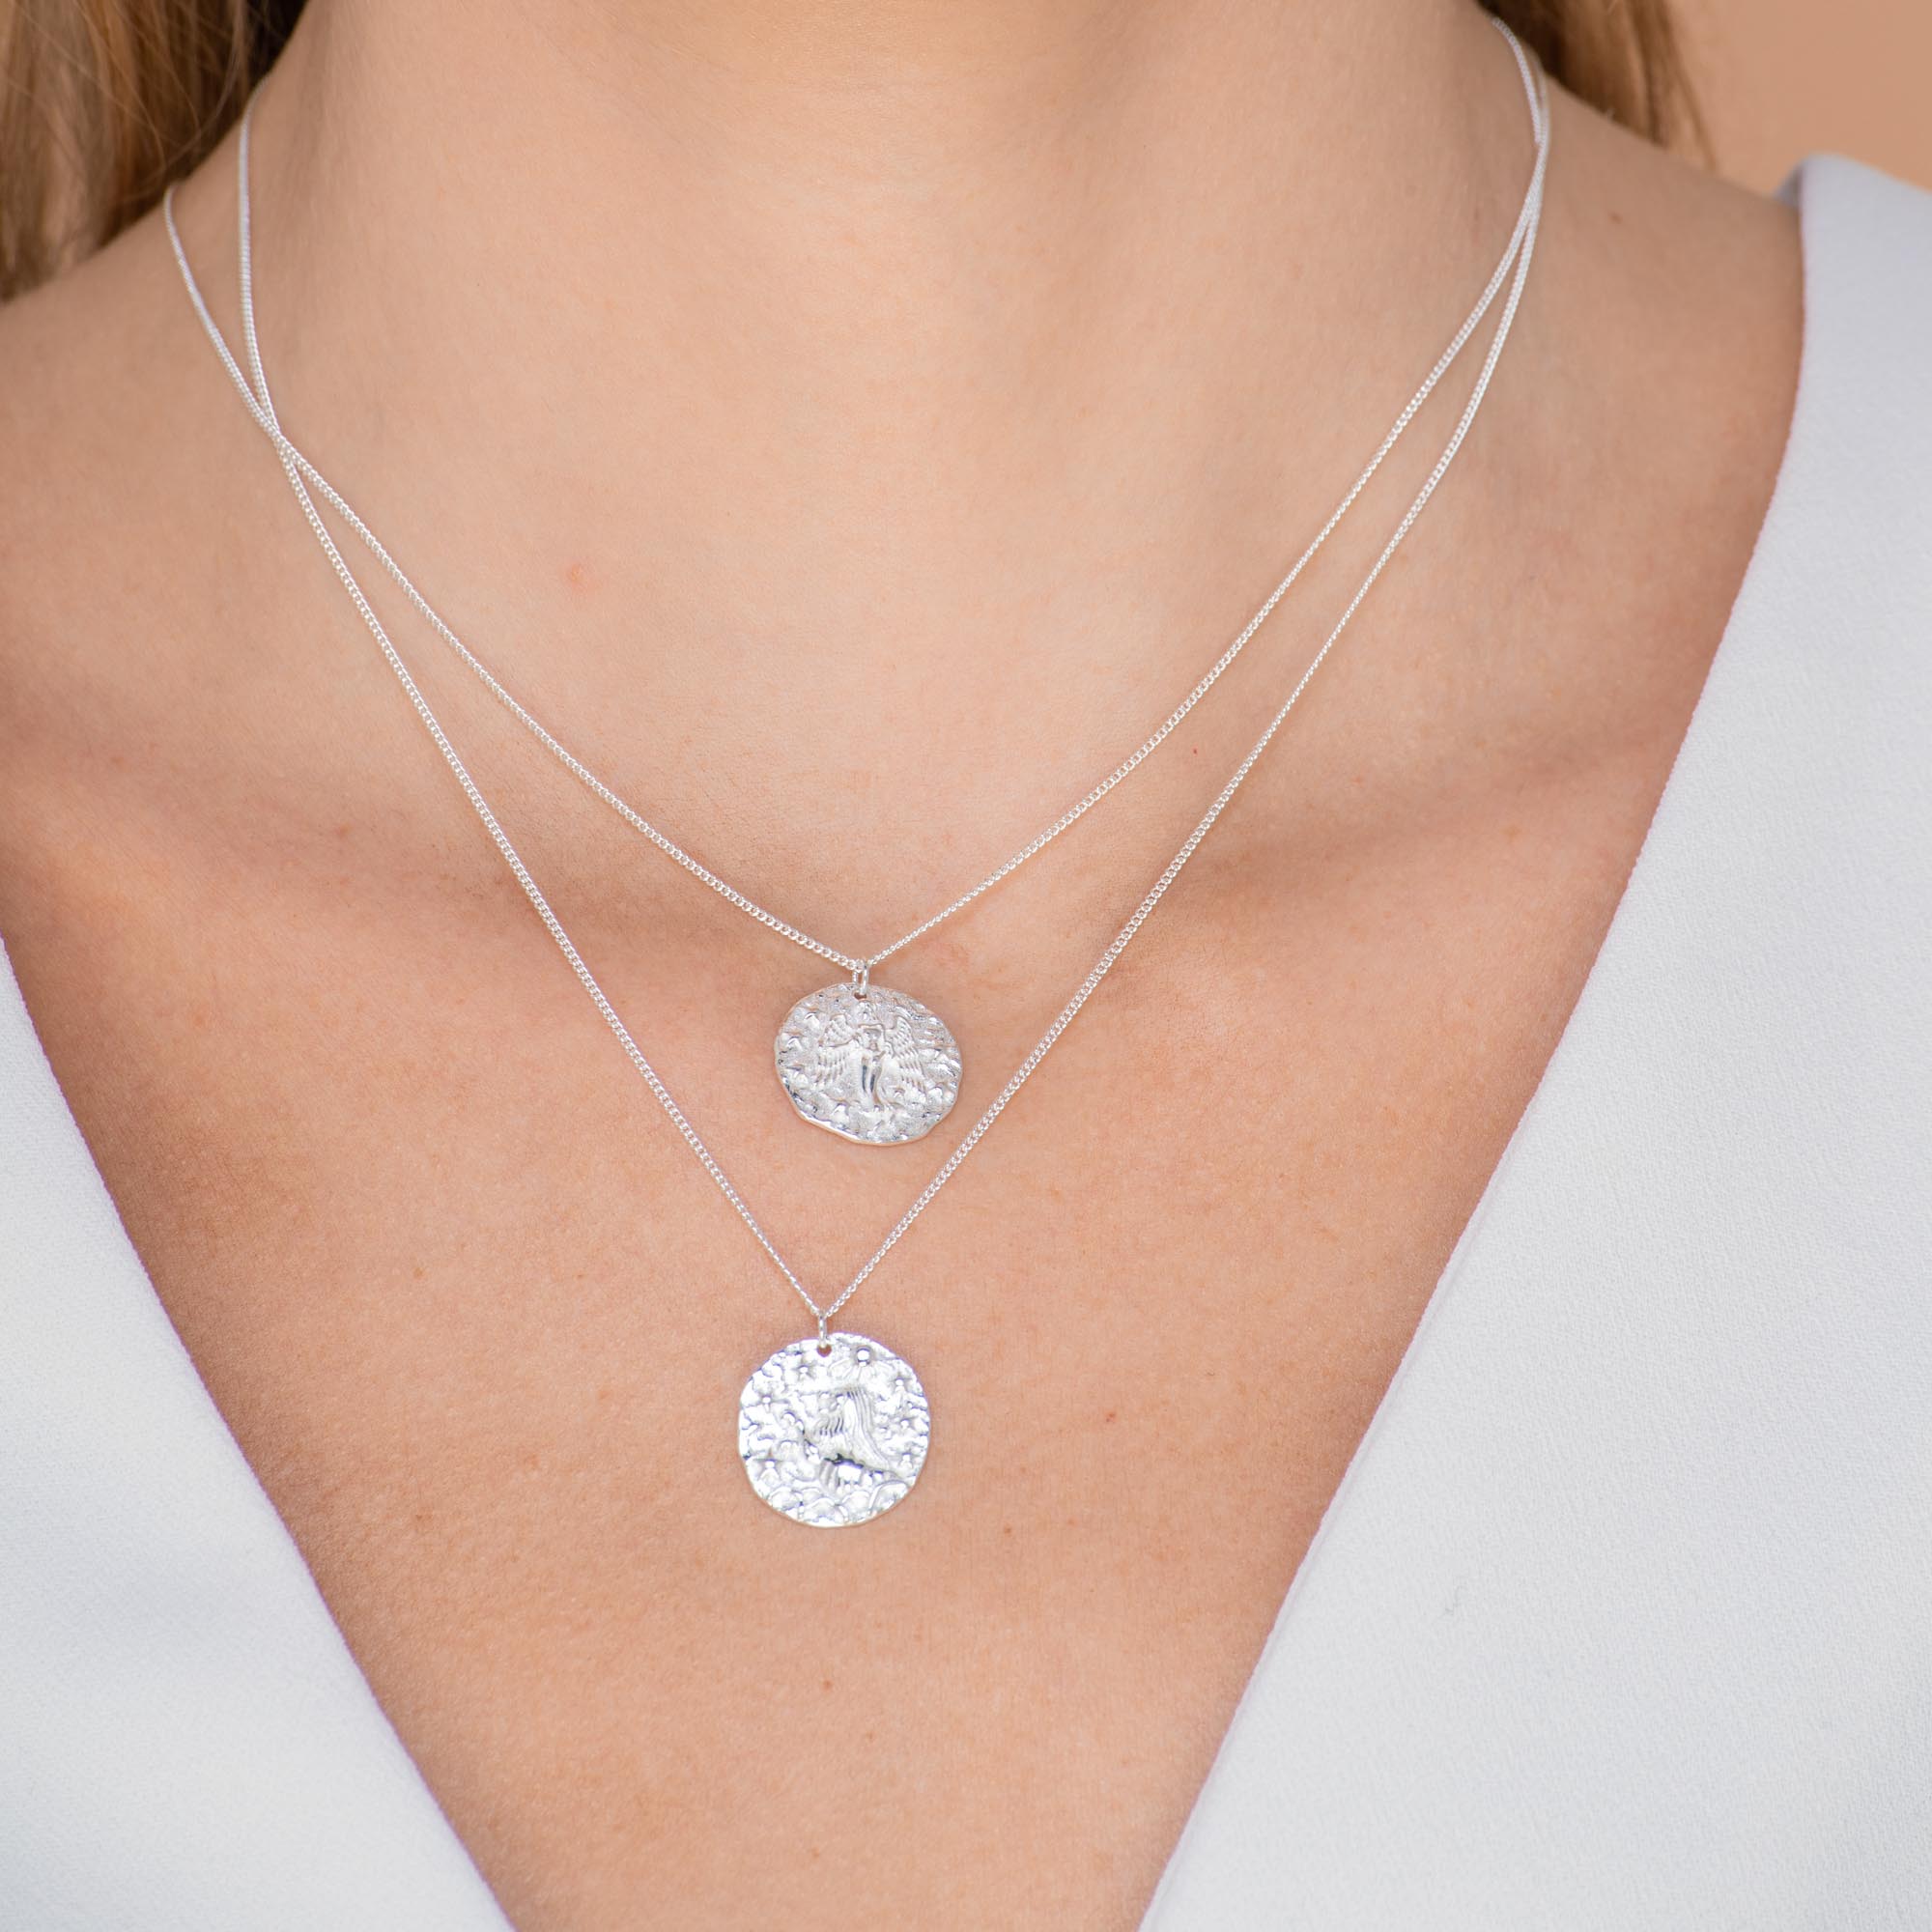 Leo - Star Sign Necklace